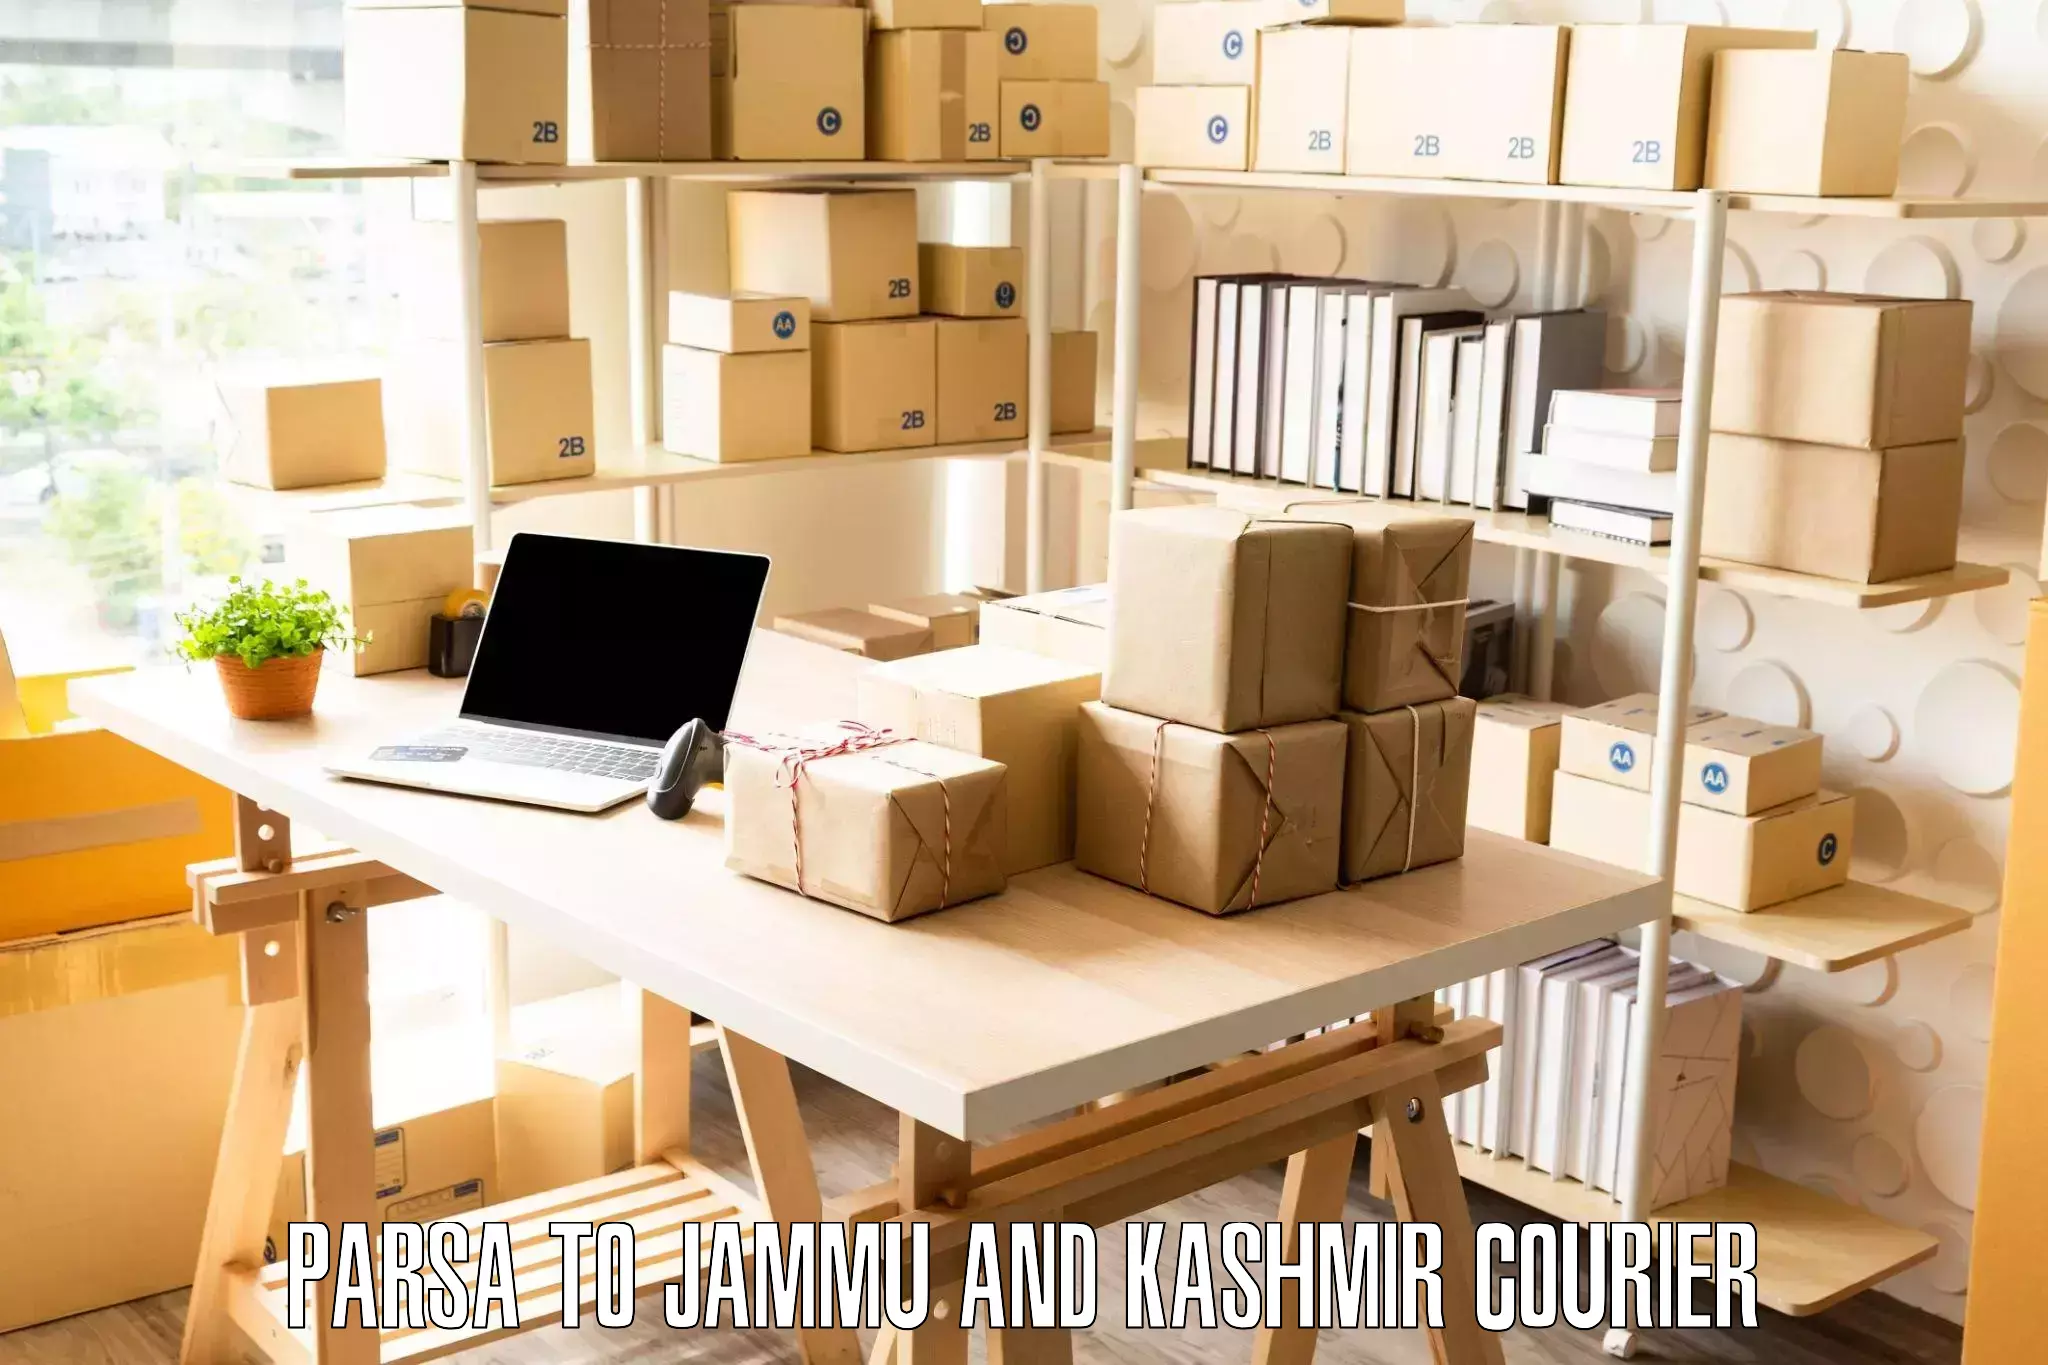 Full home relocation services Parsa to University of Jammu